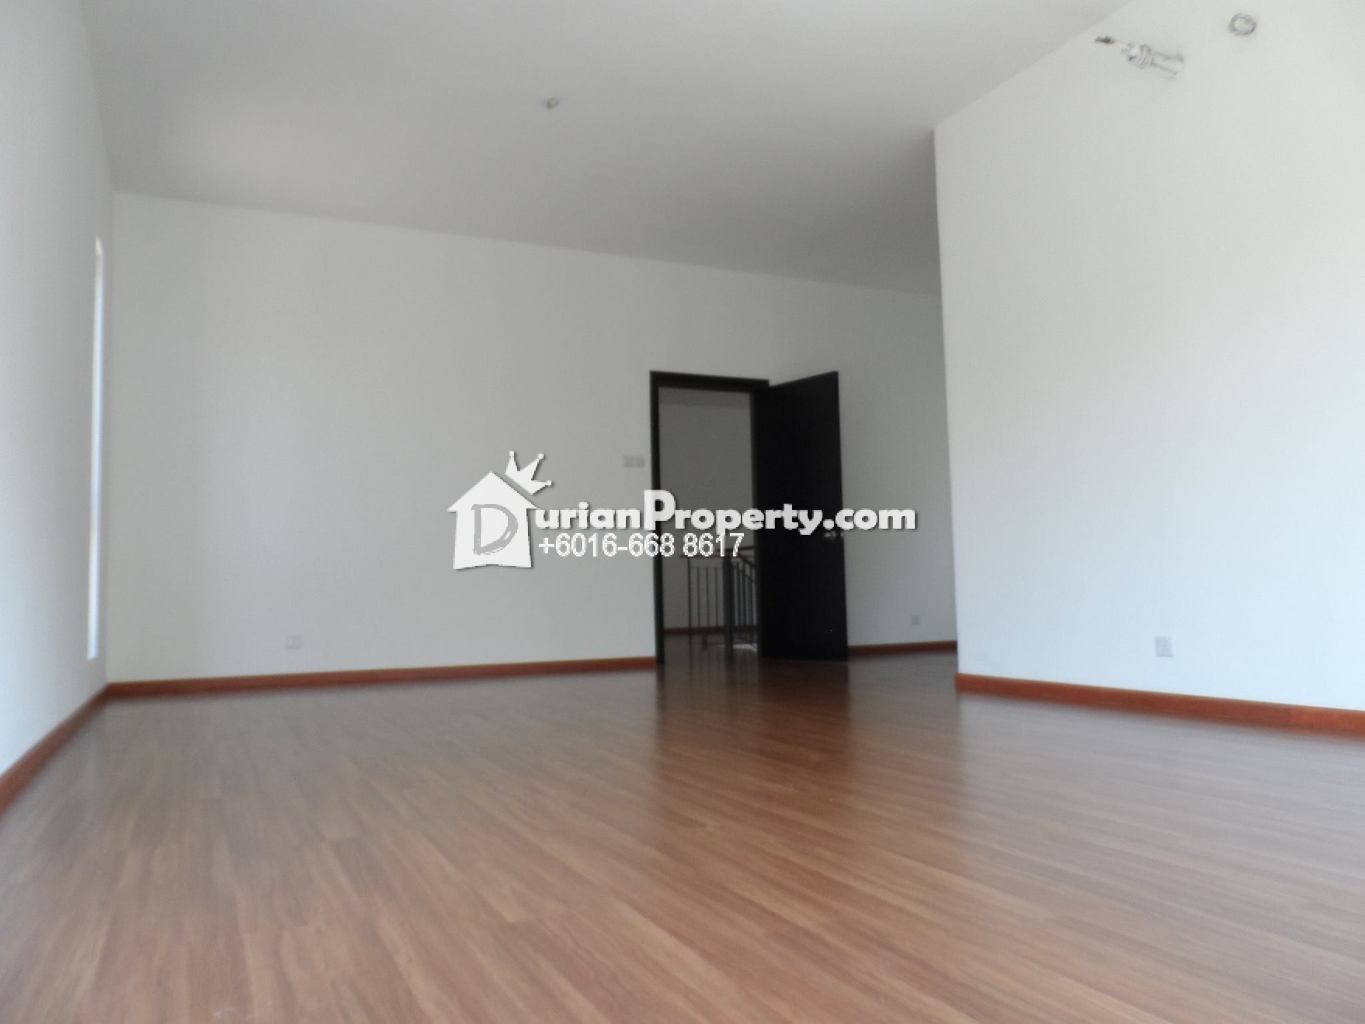 Terrace House For Sale At Emerald Gardens Rawang For Rm 800 000